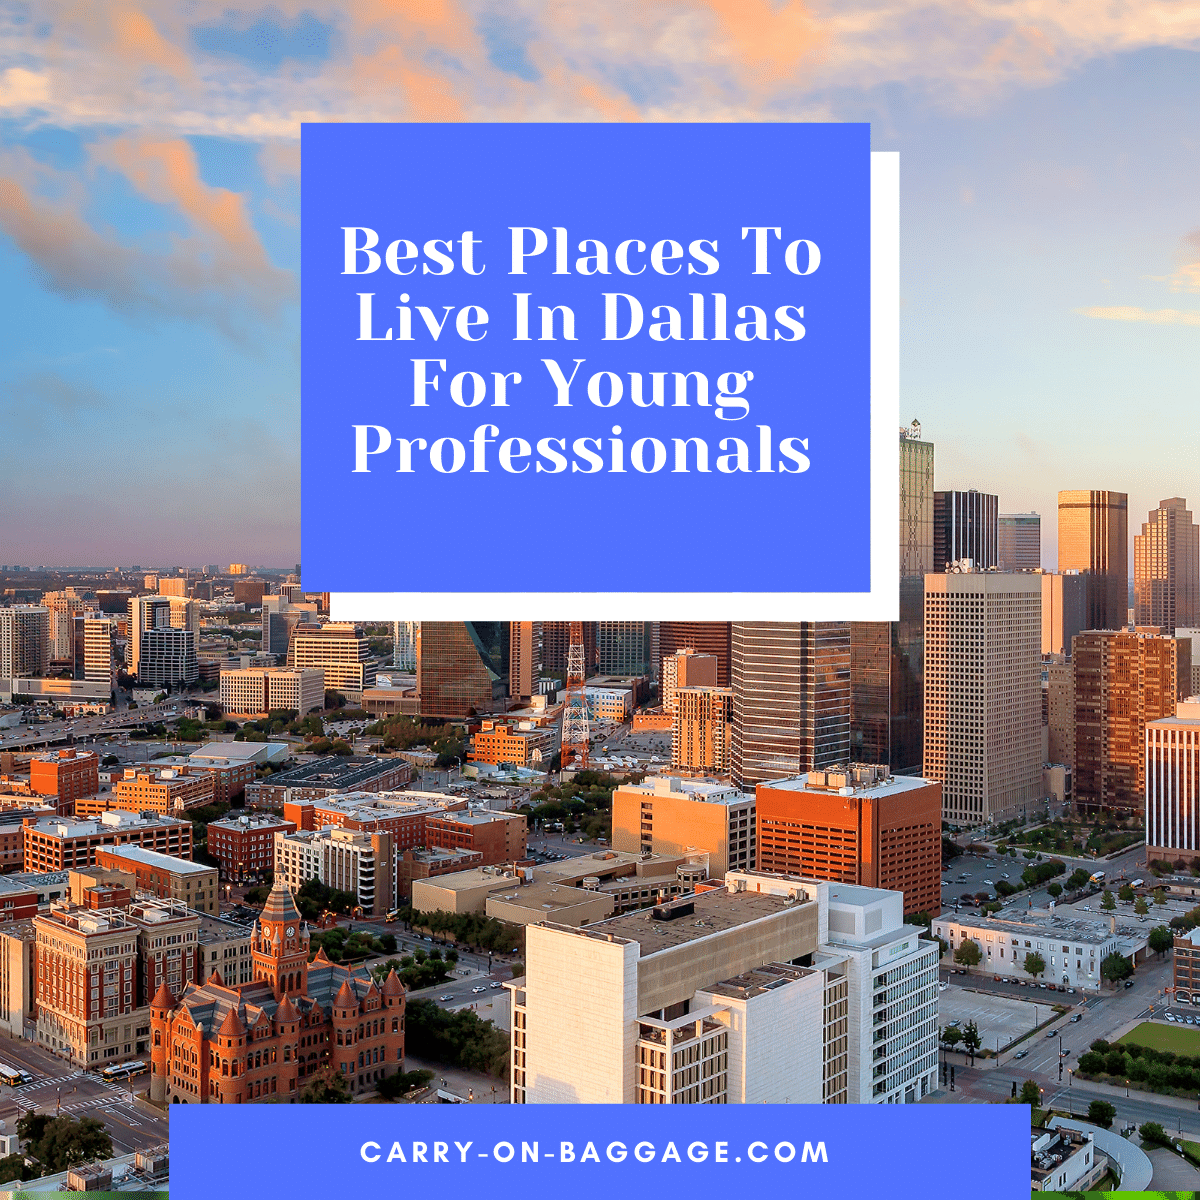 Best Places To Live In Dallas For Young Professionals